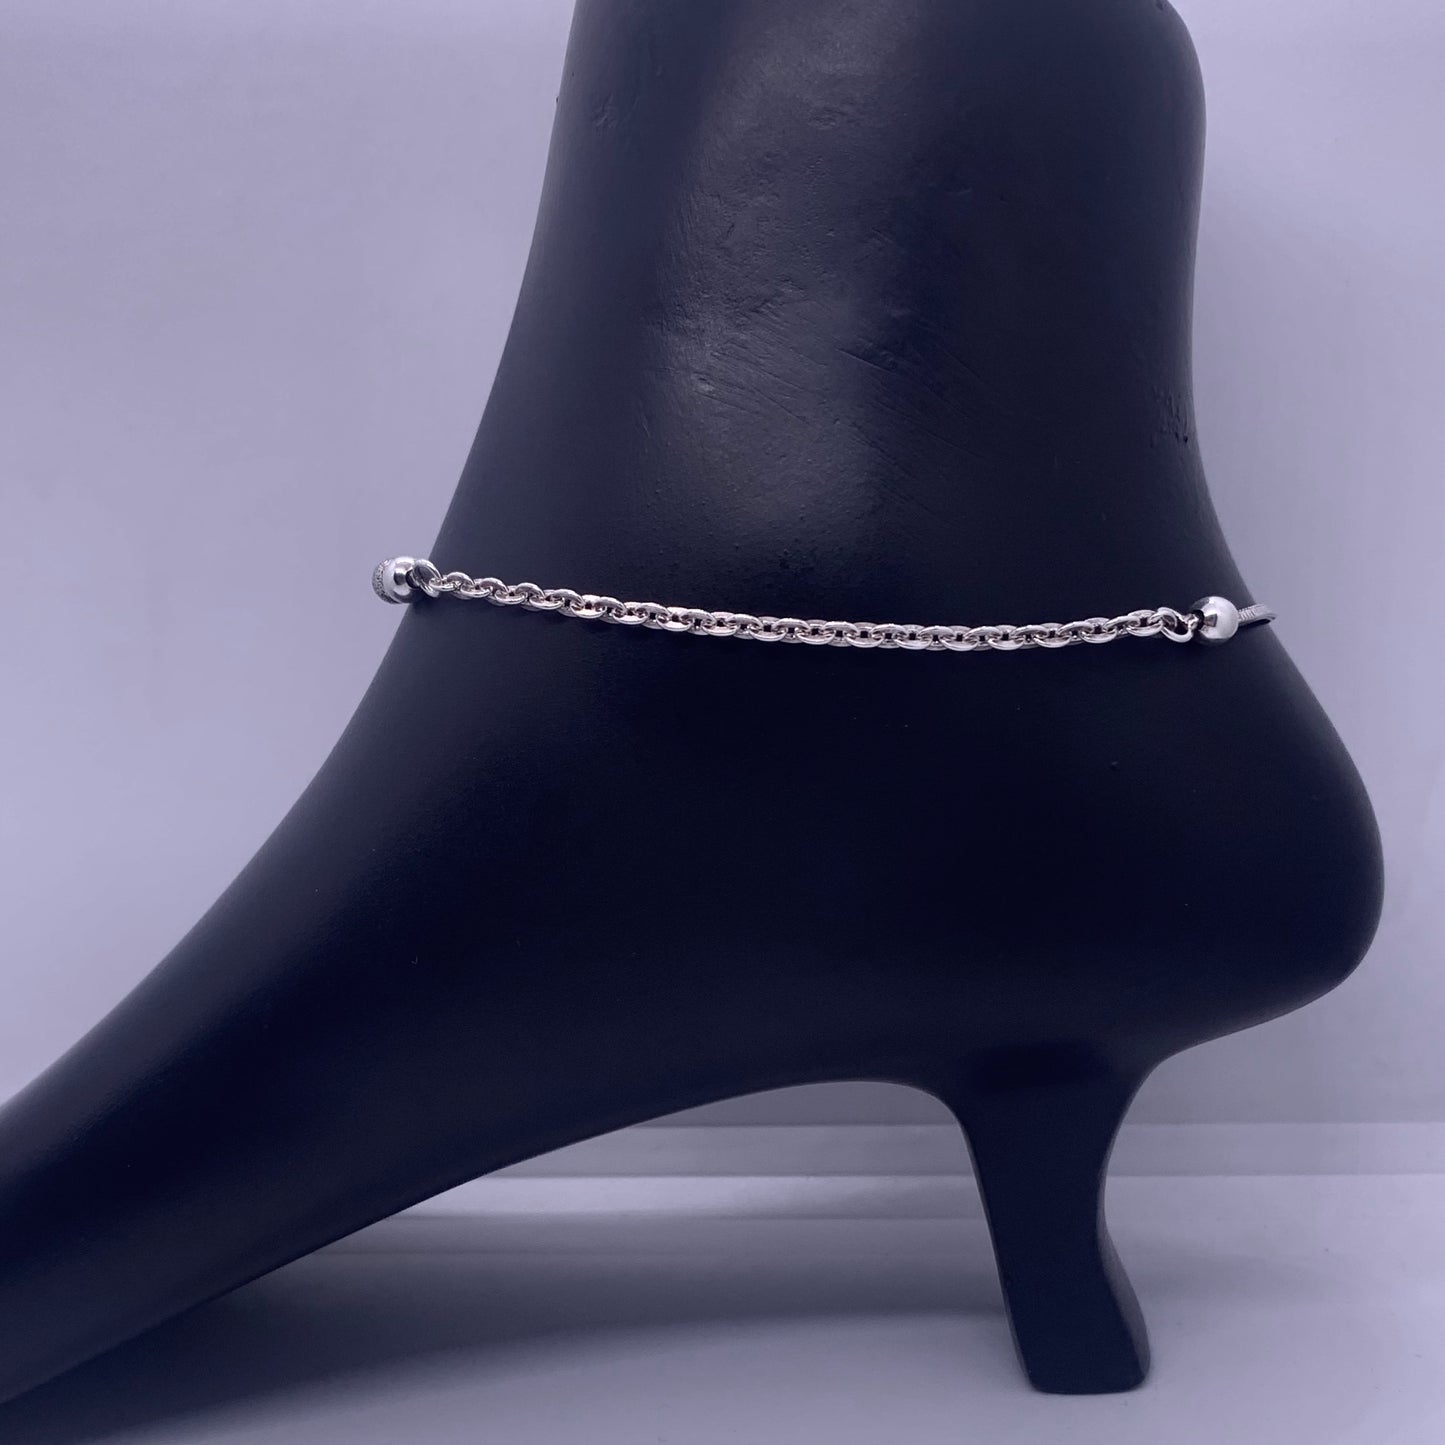 Beautiful Rope and Chain Pure Silver Anklet - Silver Jewelery 925